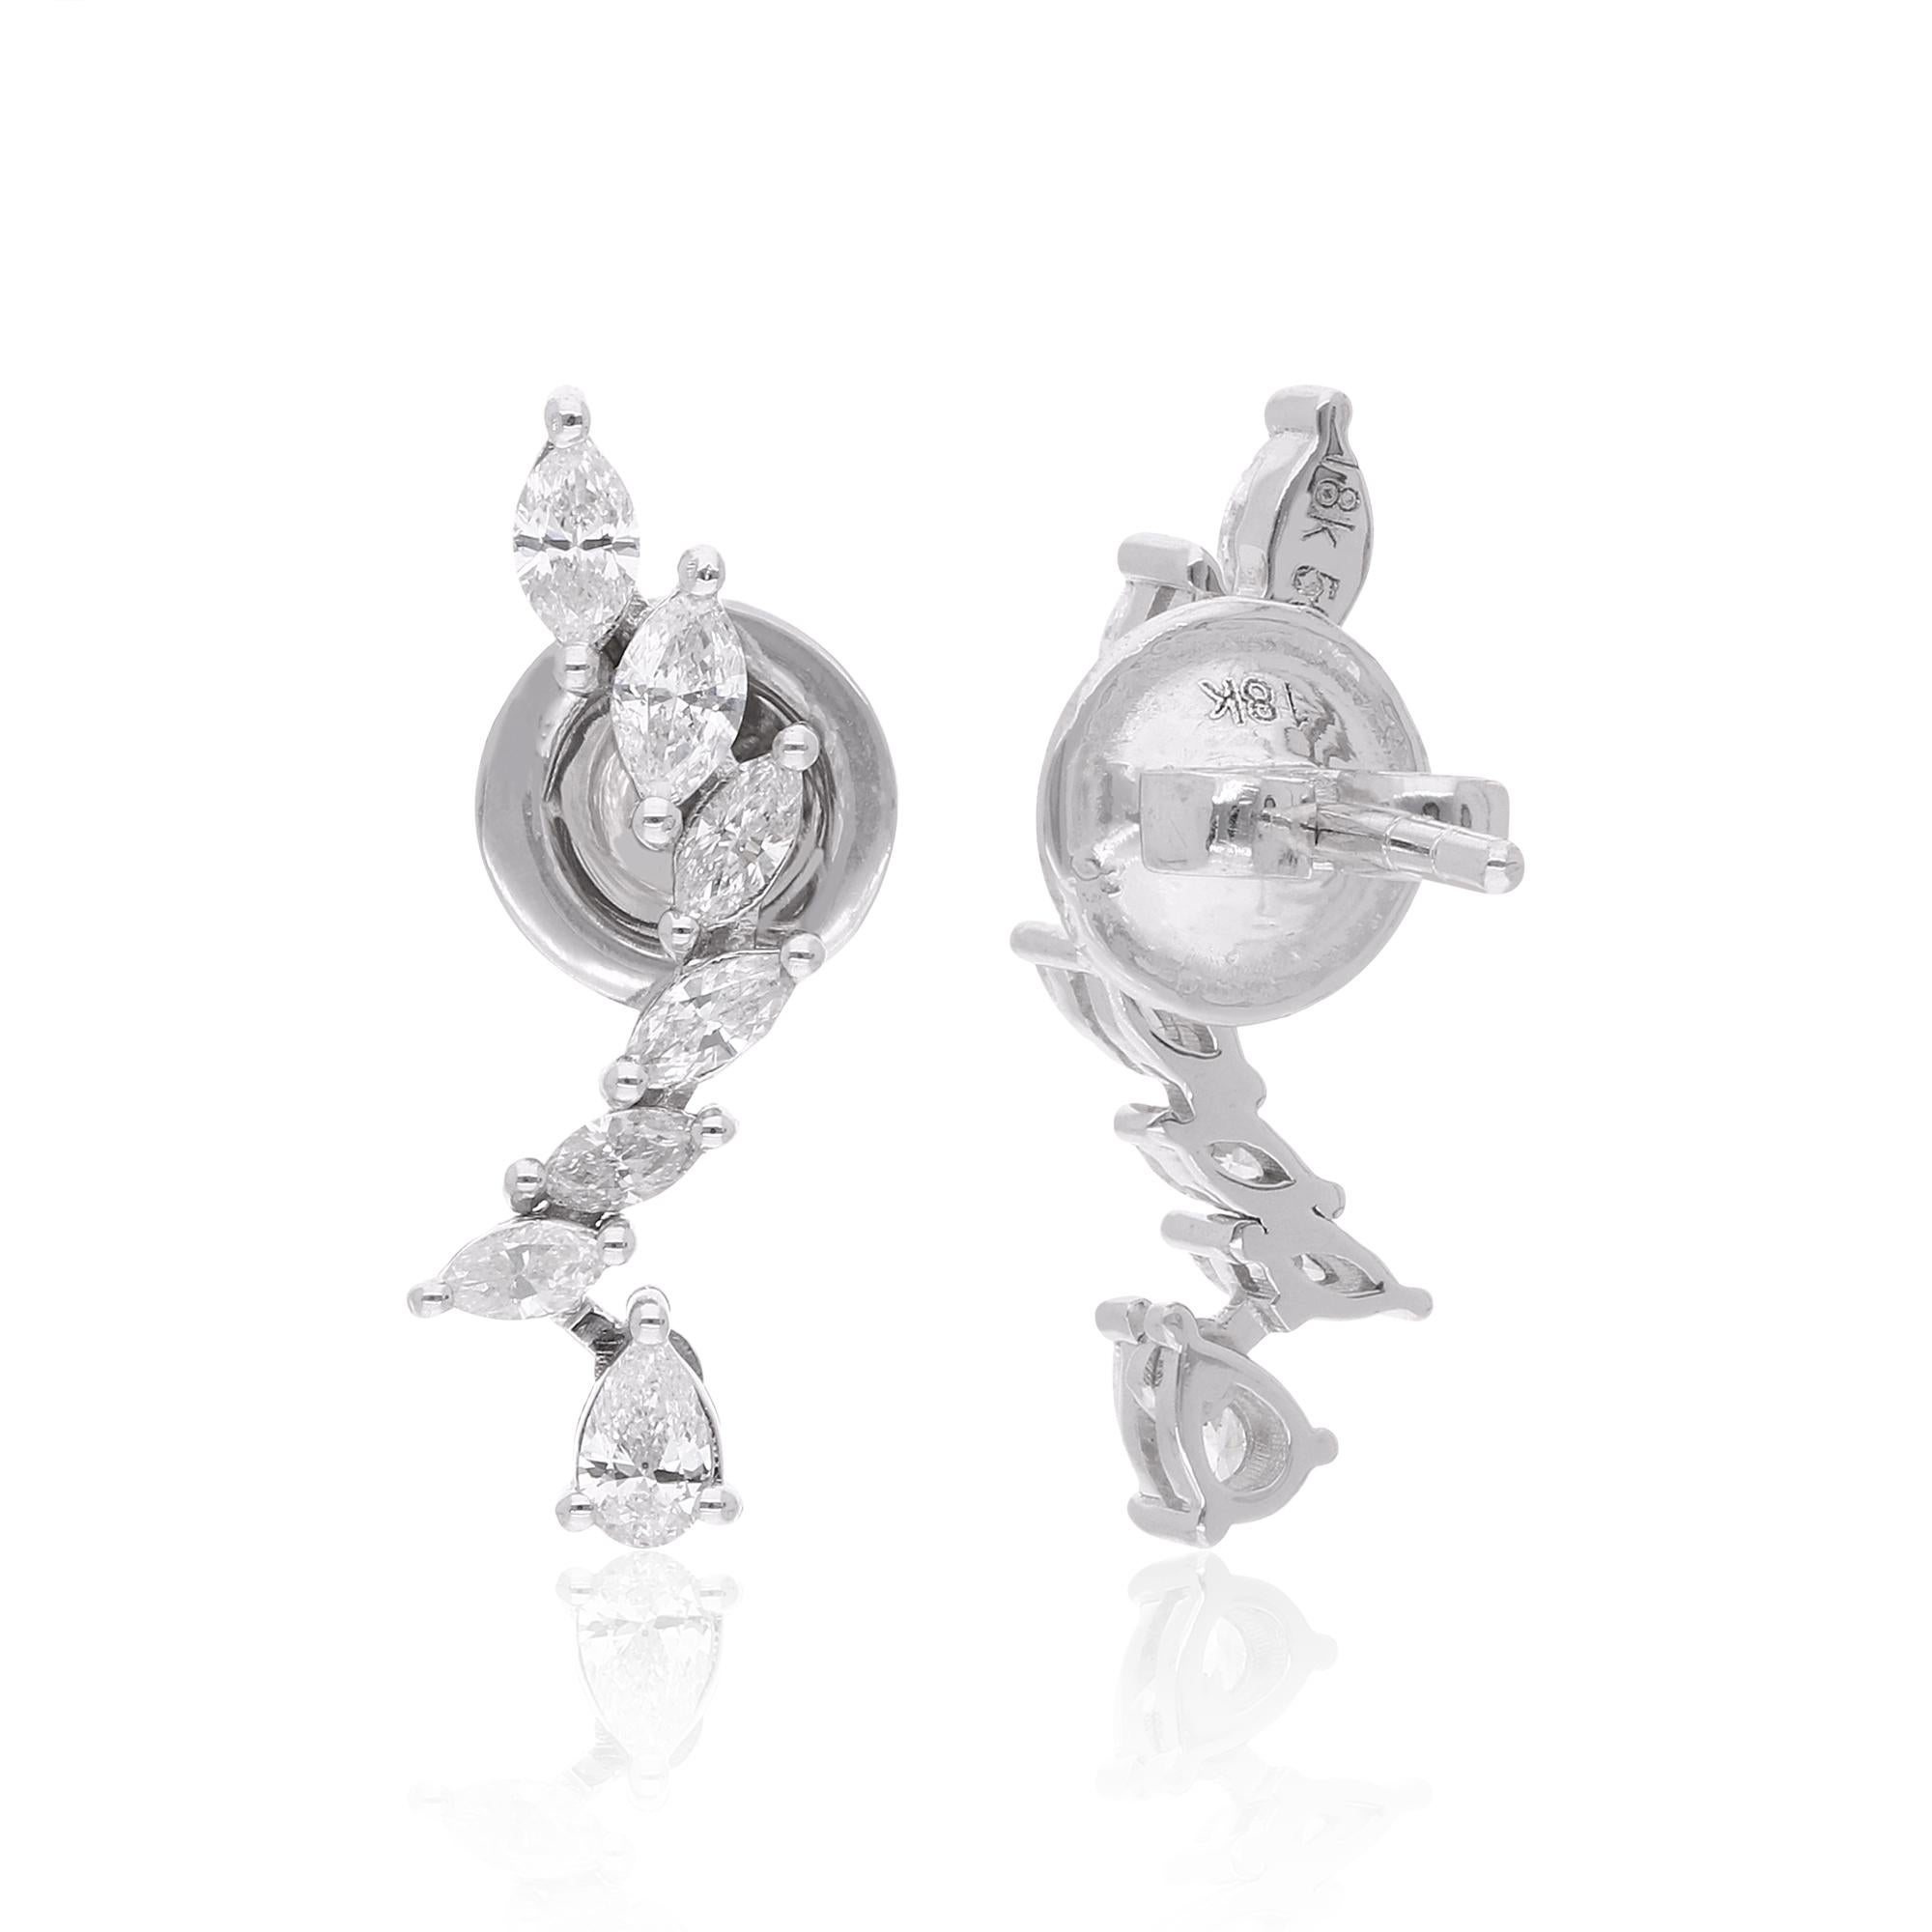 Expertly crafted in 14 karat white gold, the setting of these earrings accentuates the natural beauty of the diamonds while adding a touch of modern refinement. The white gold perfectly complements the dazzling sparkle of the diamonds, creating a